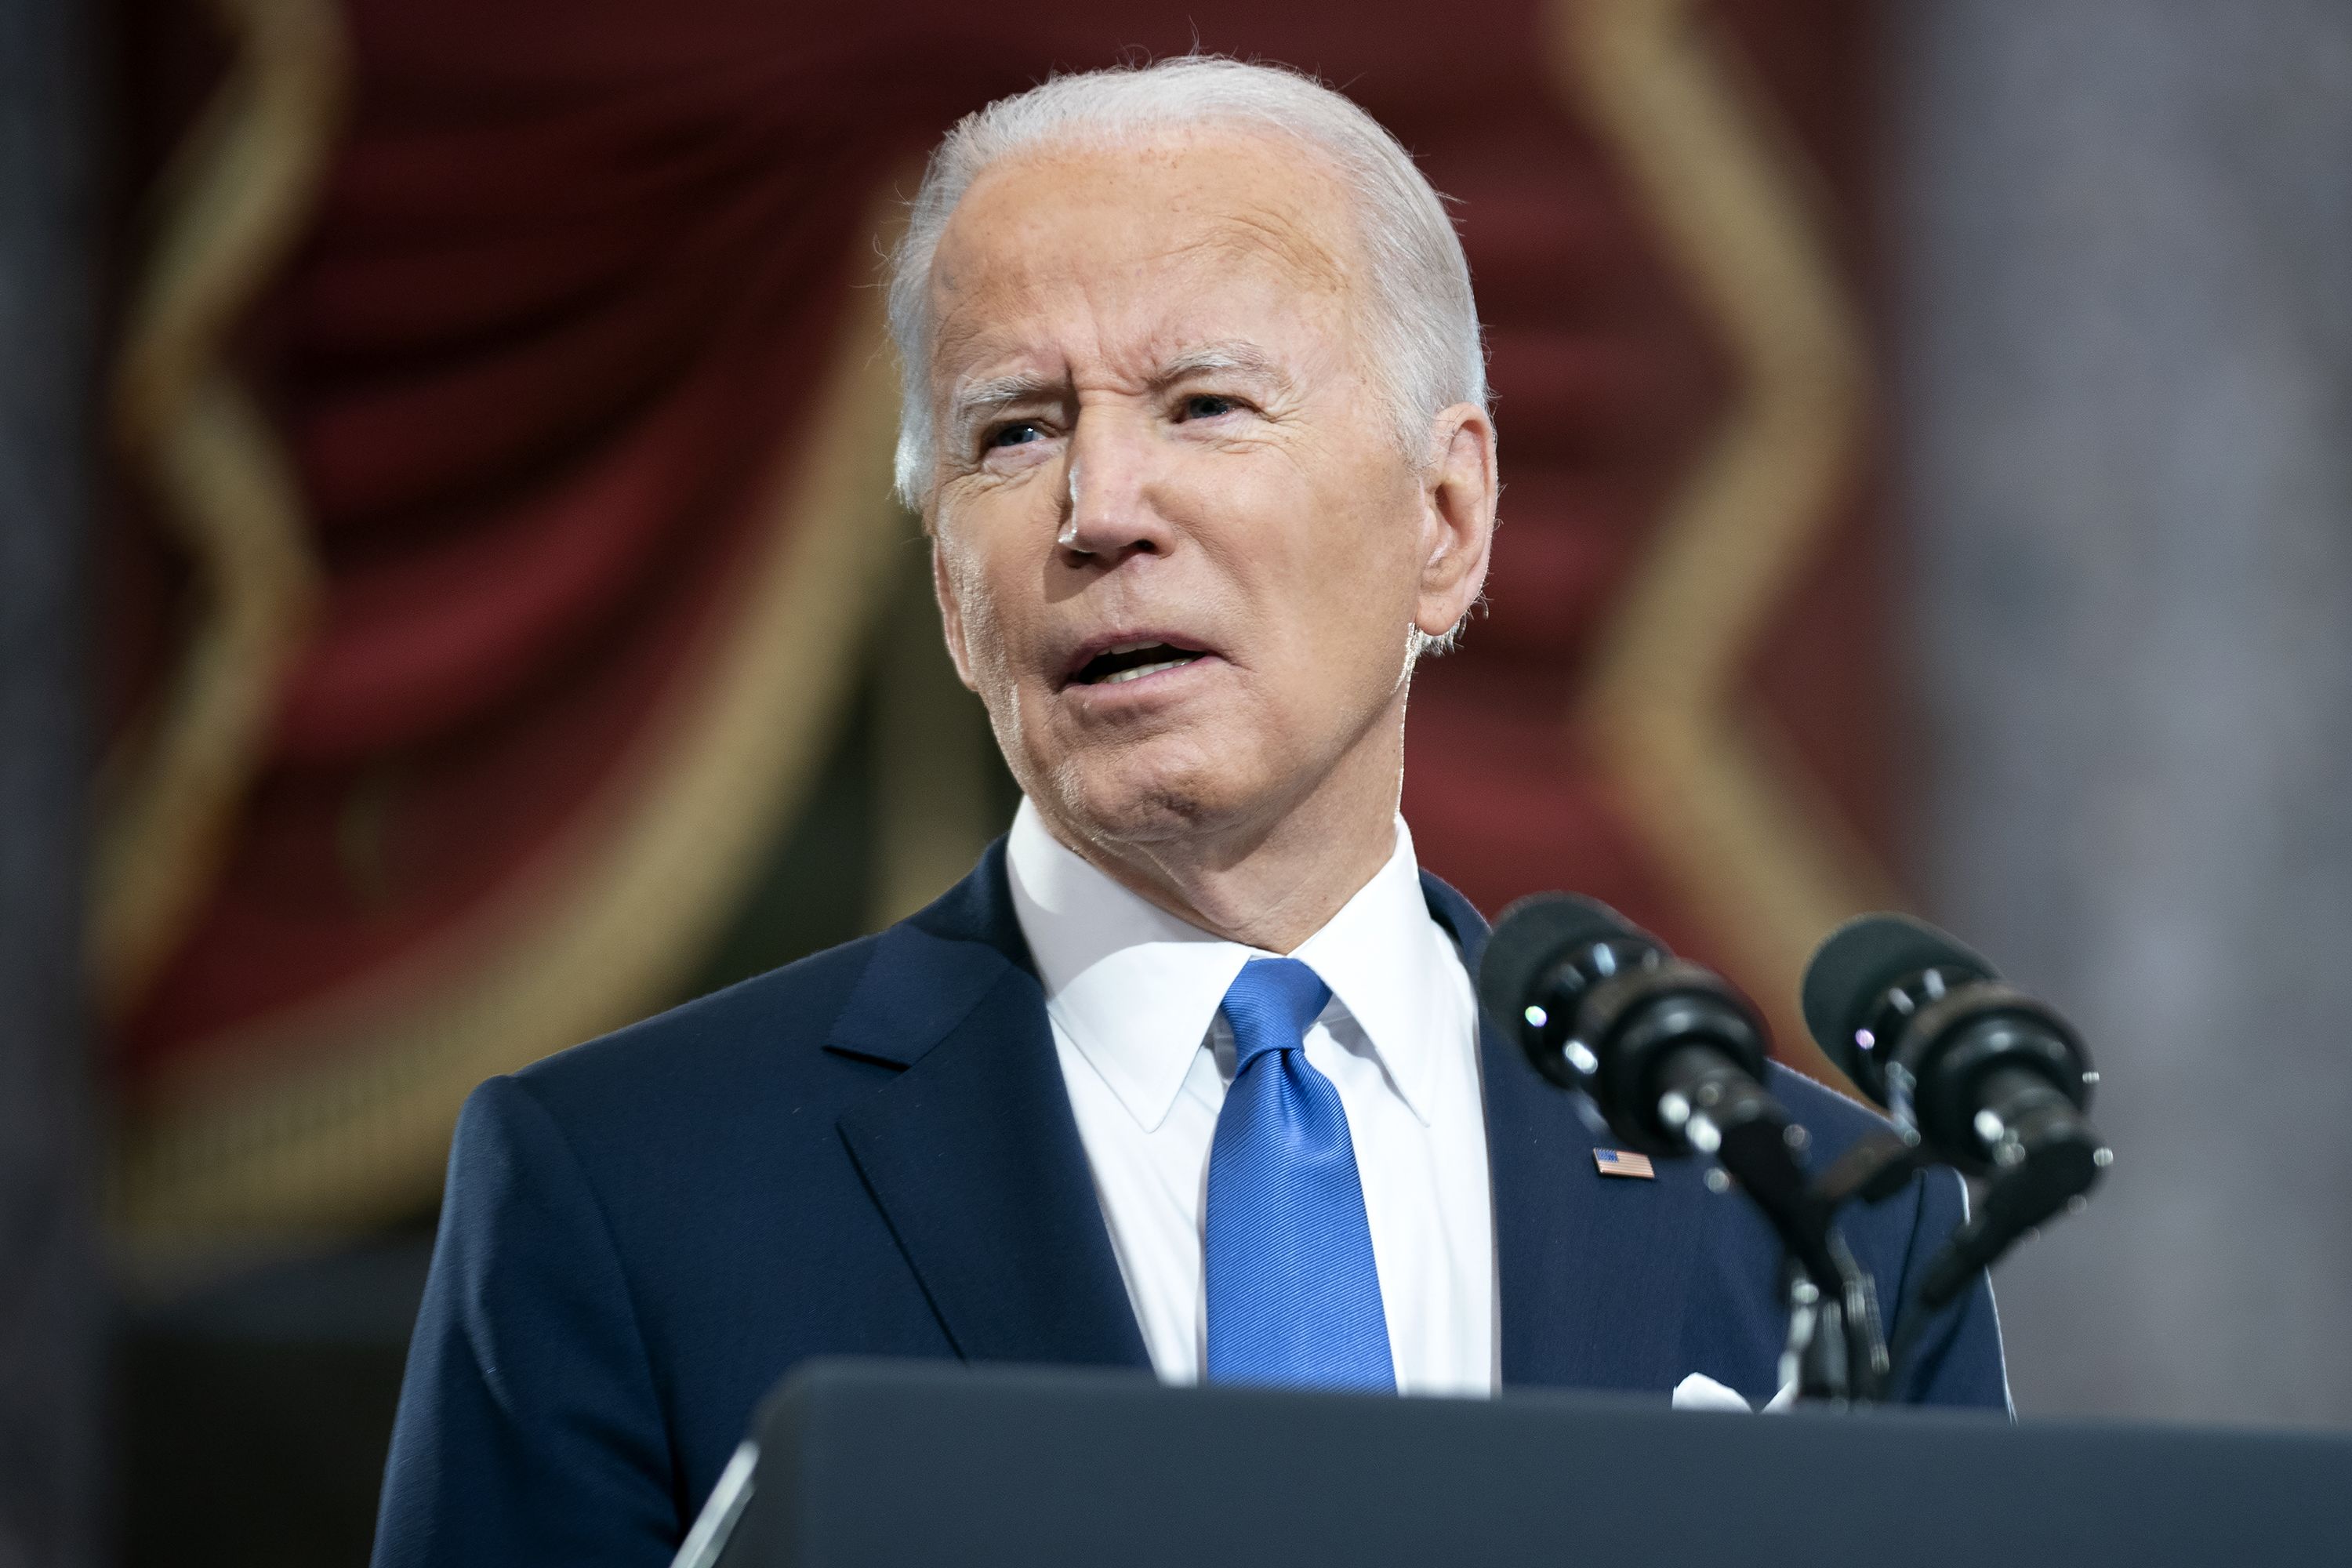 Fundament Dalset modtage The polls hold scant good news for Joe Biden one year in to his presidency  | CNN Politics